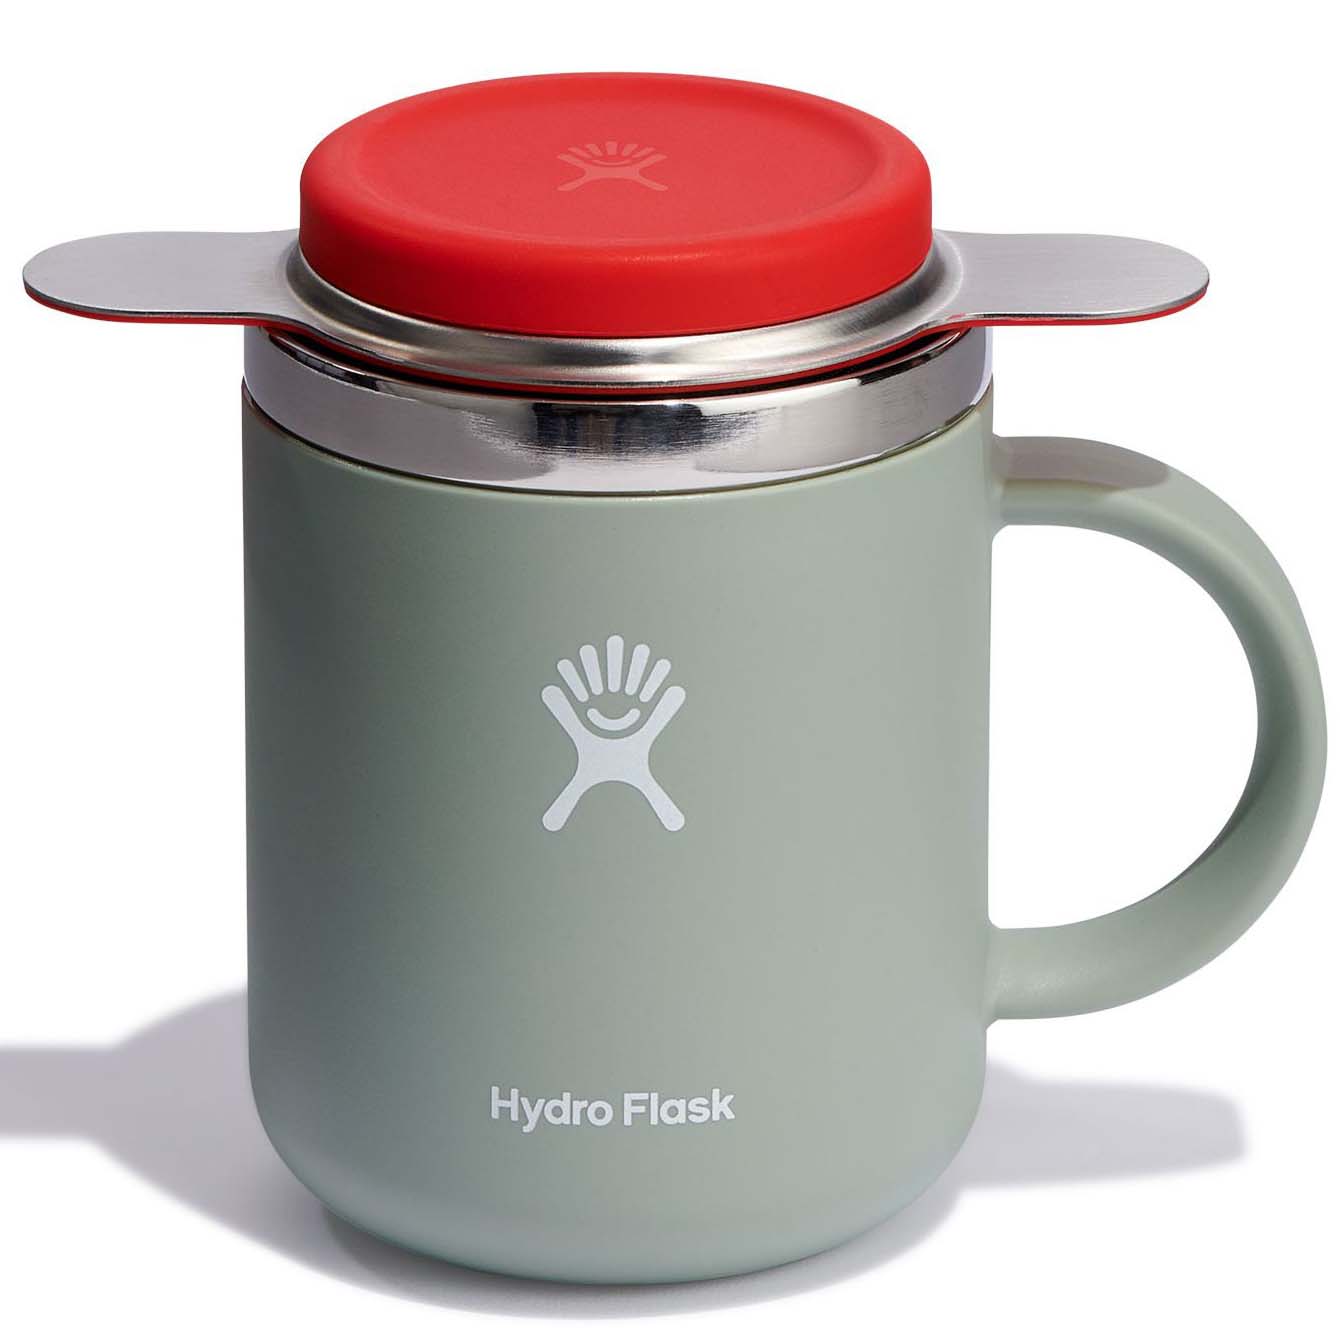 Hydro Flask Tea Infuser Camping Accessory